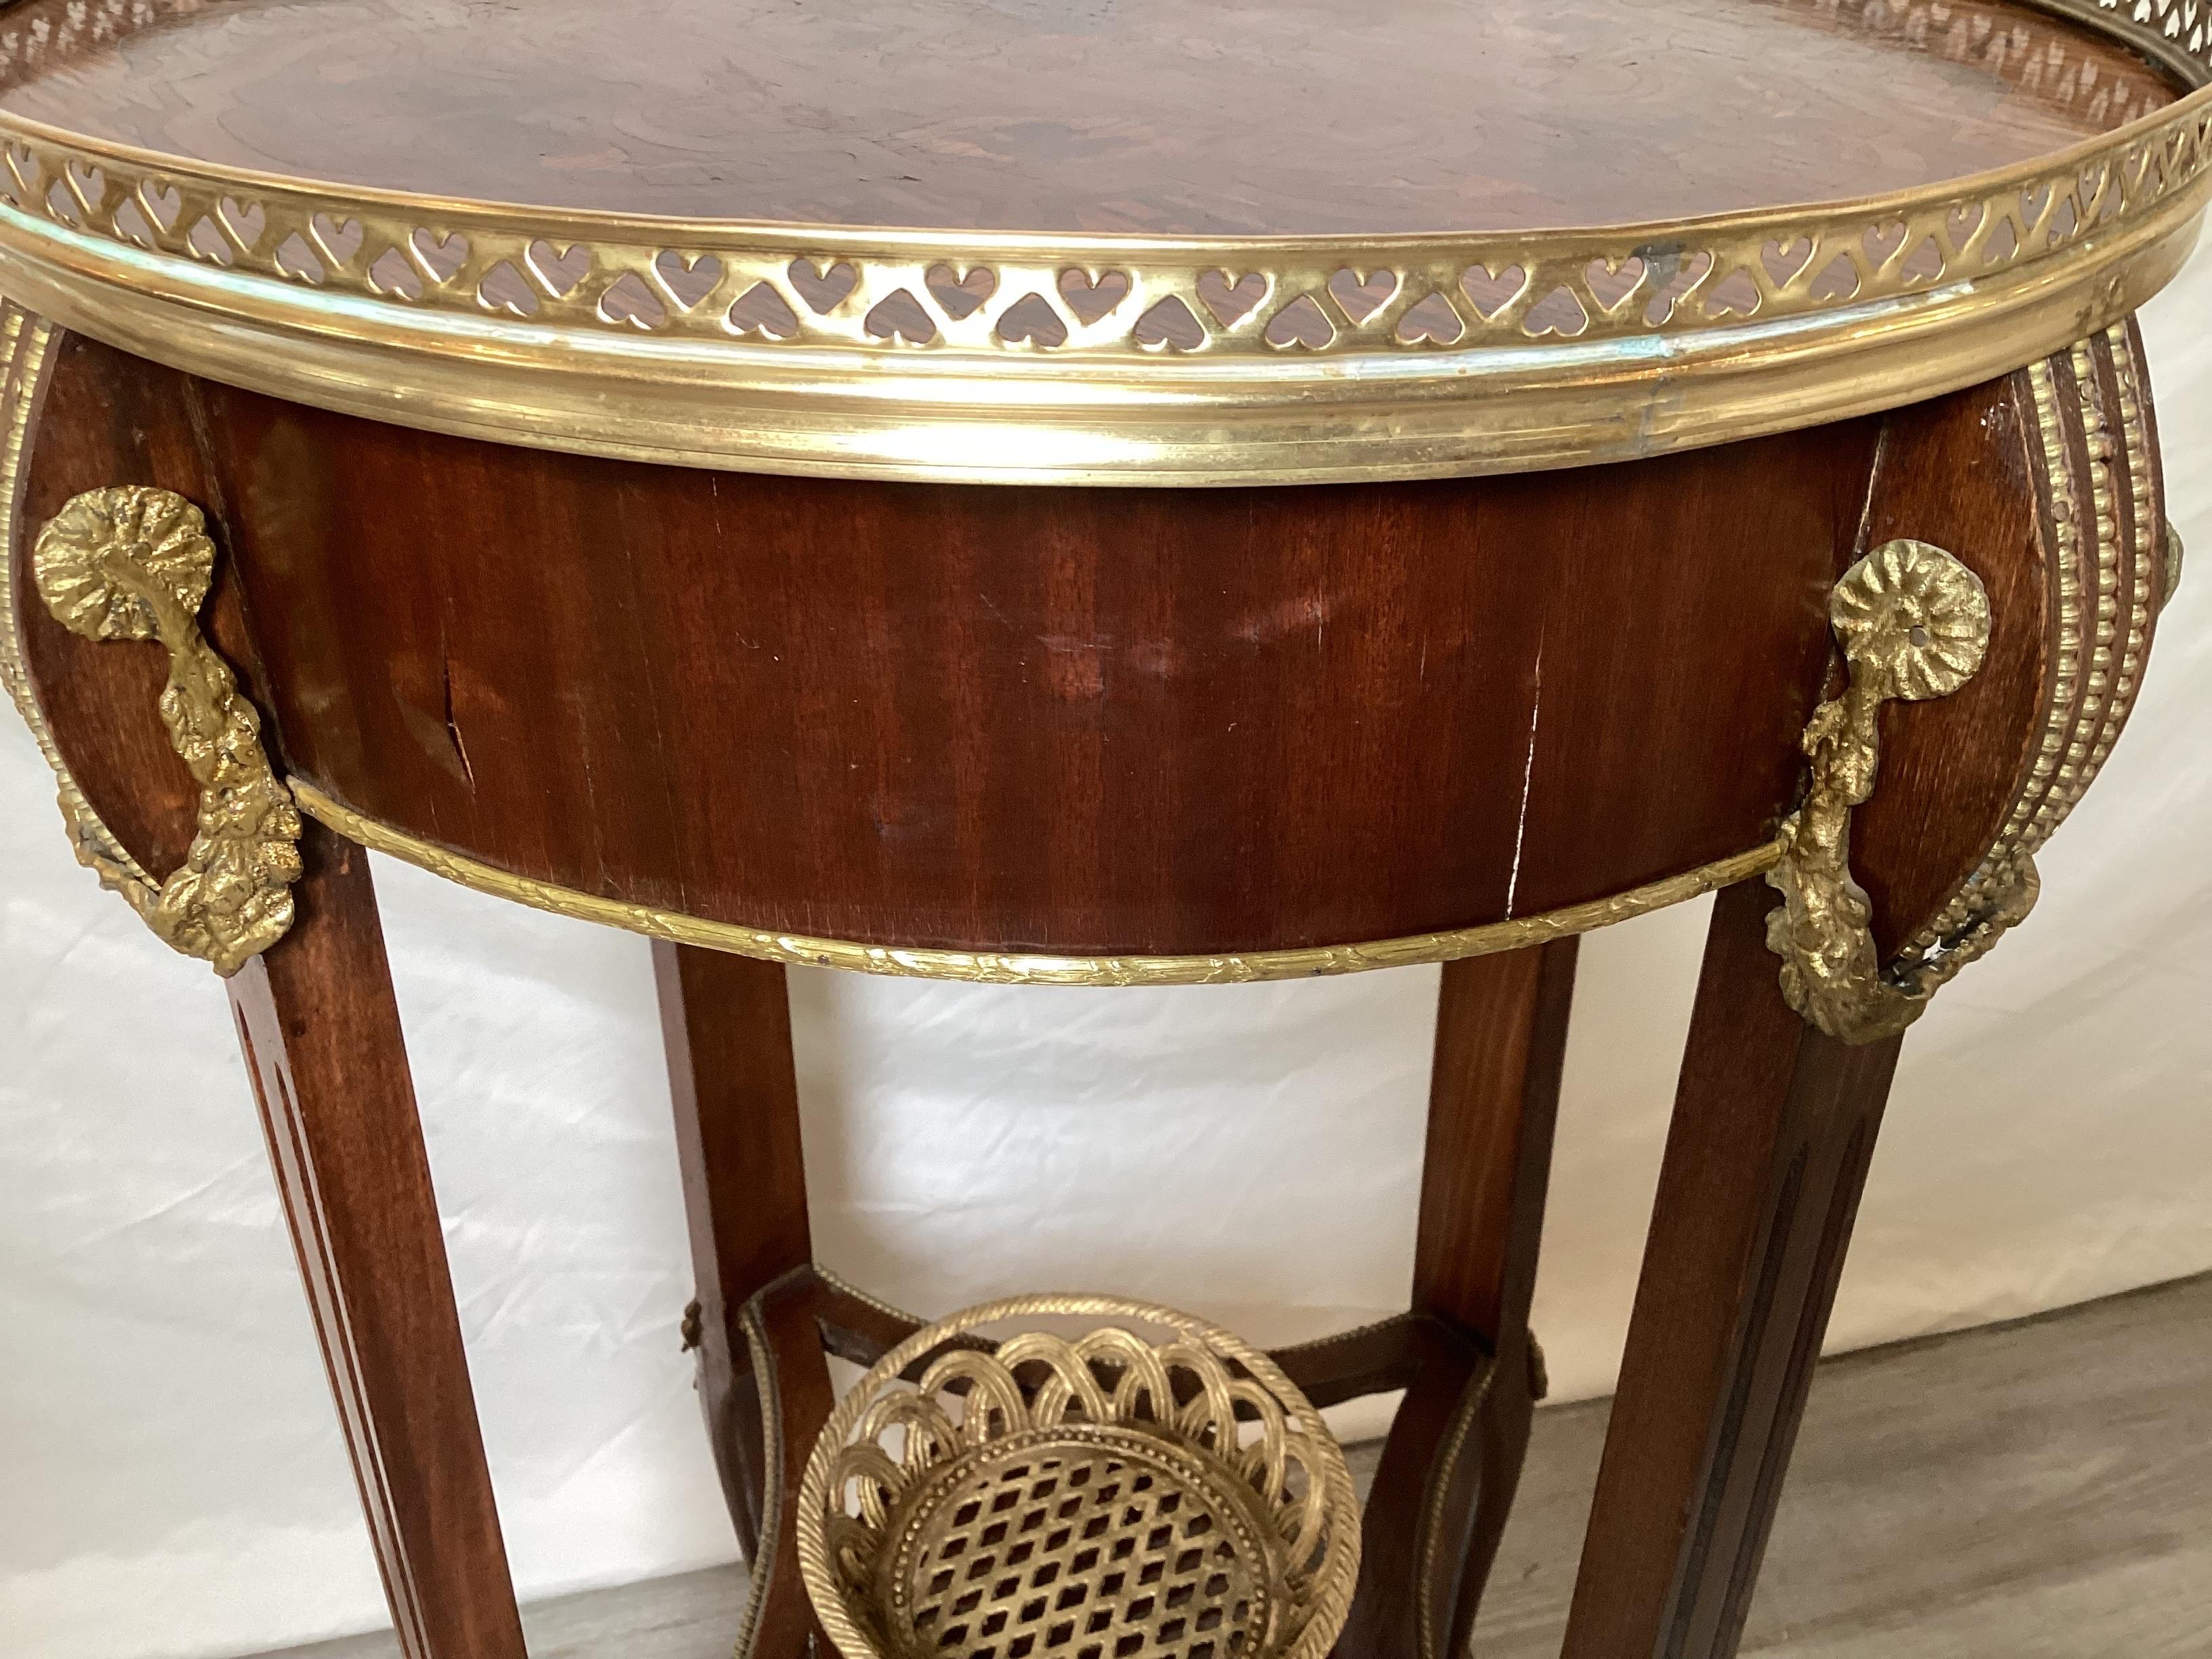 Bronze Mahogany and Tulip Wood Inlaid Gilt Mounted Gallery Table